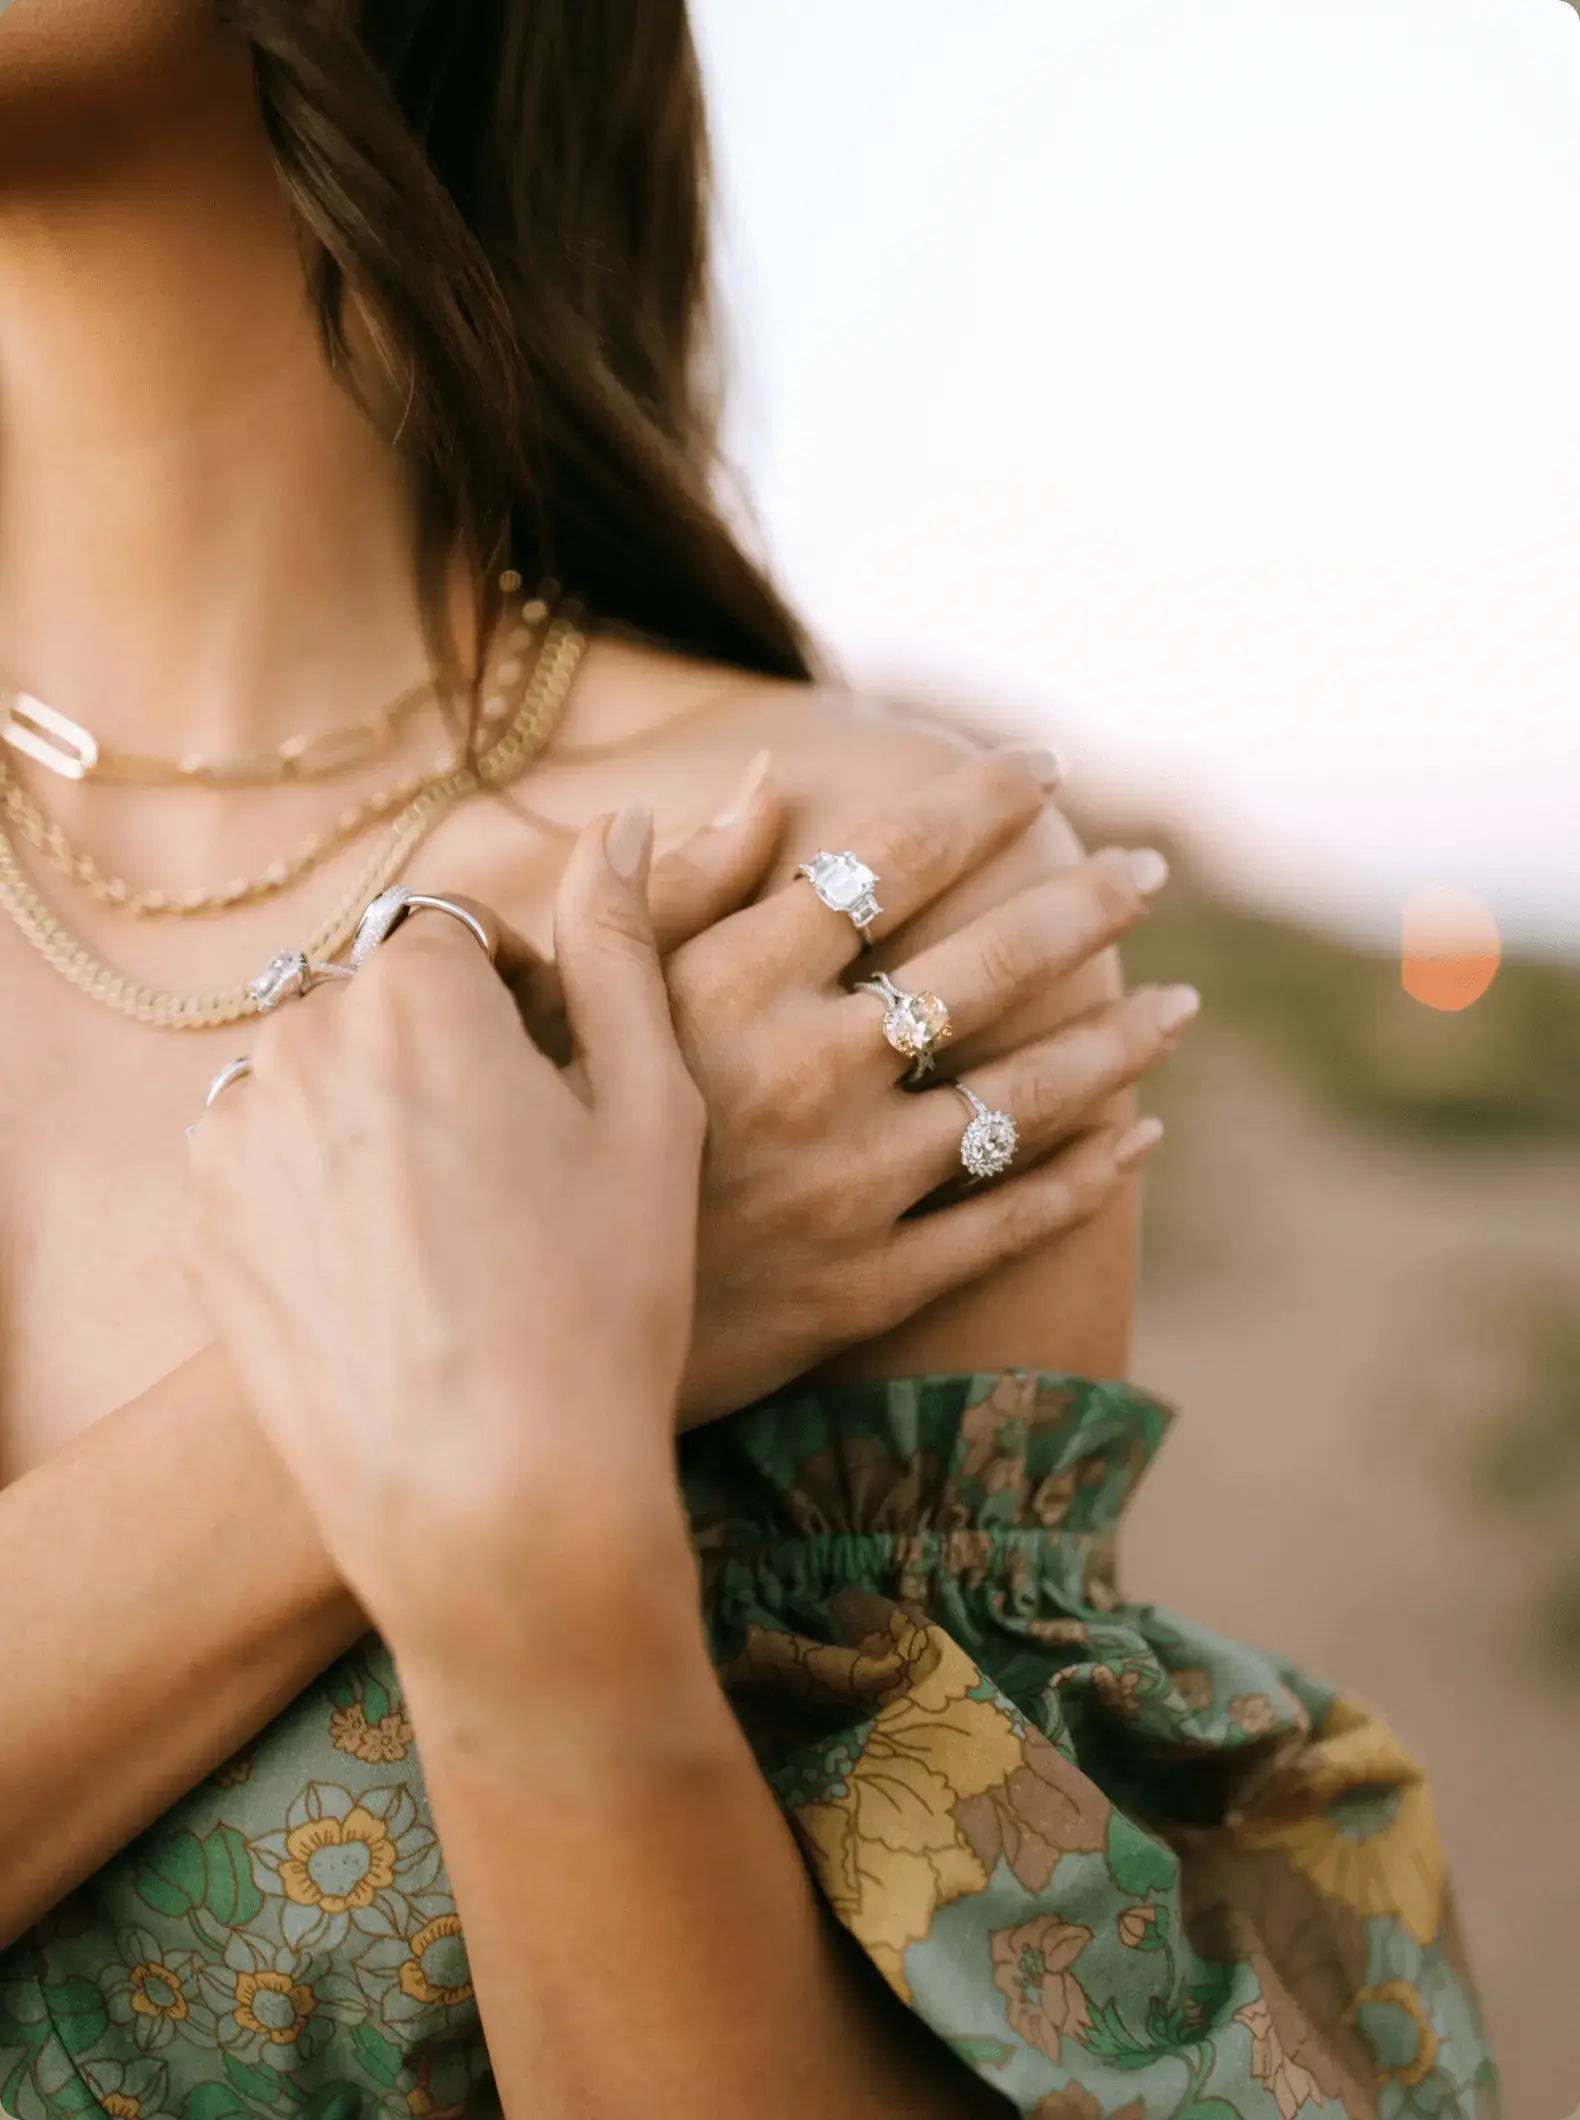 Photograph of a woman modeling jewelry.